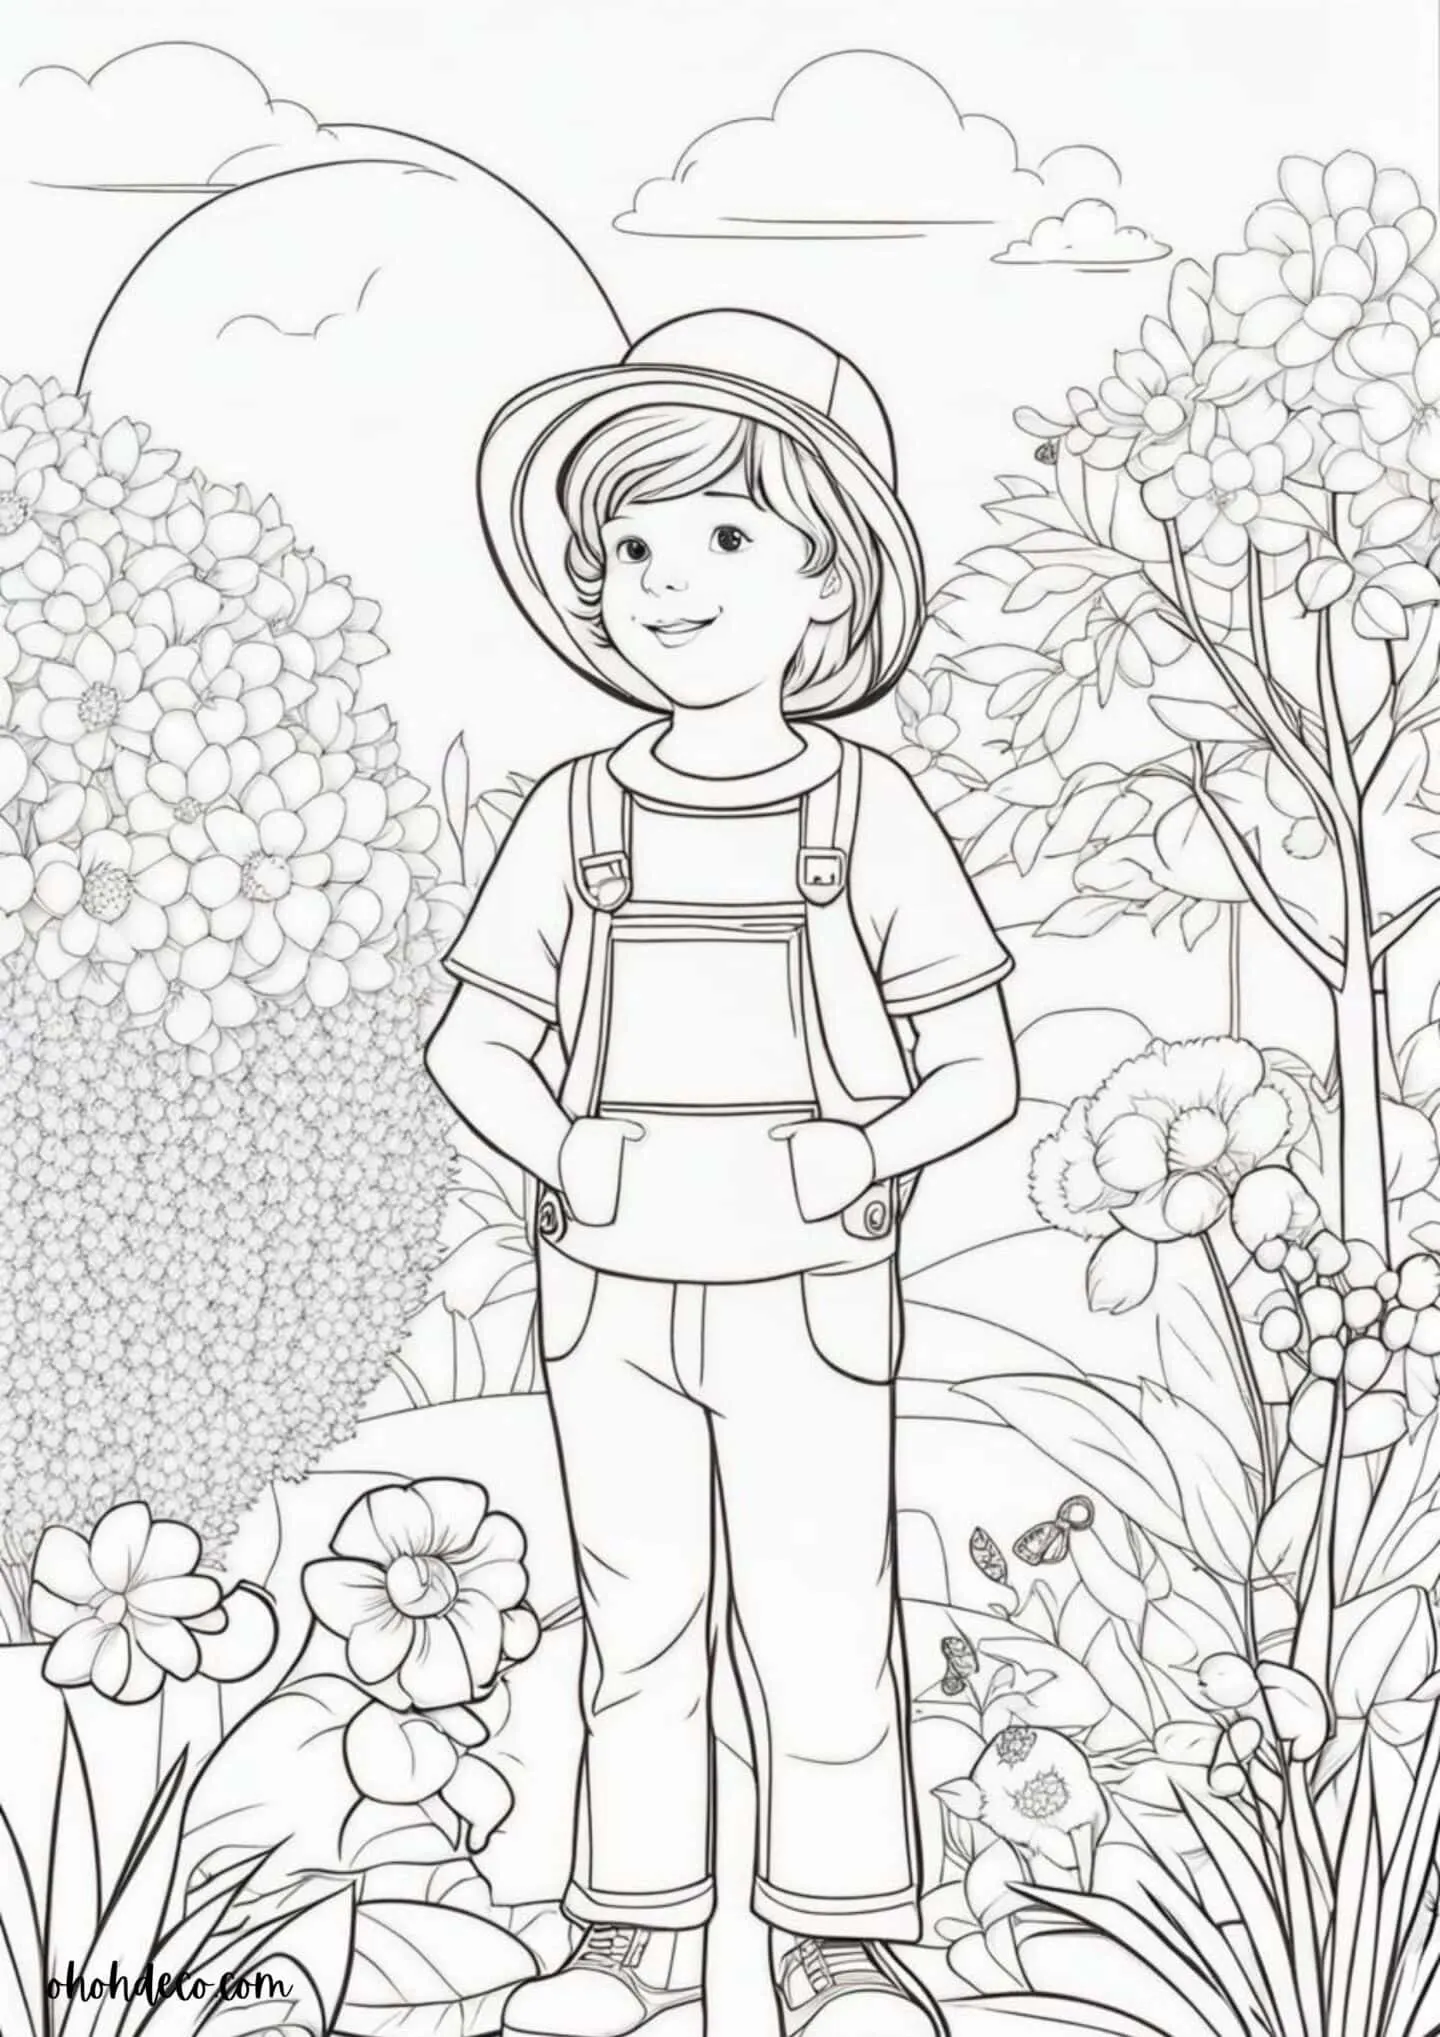 coloring page kids flower garden